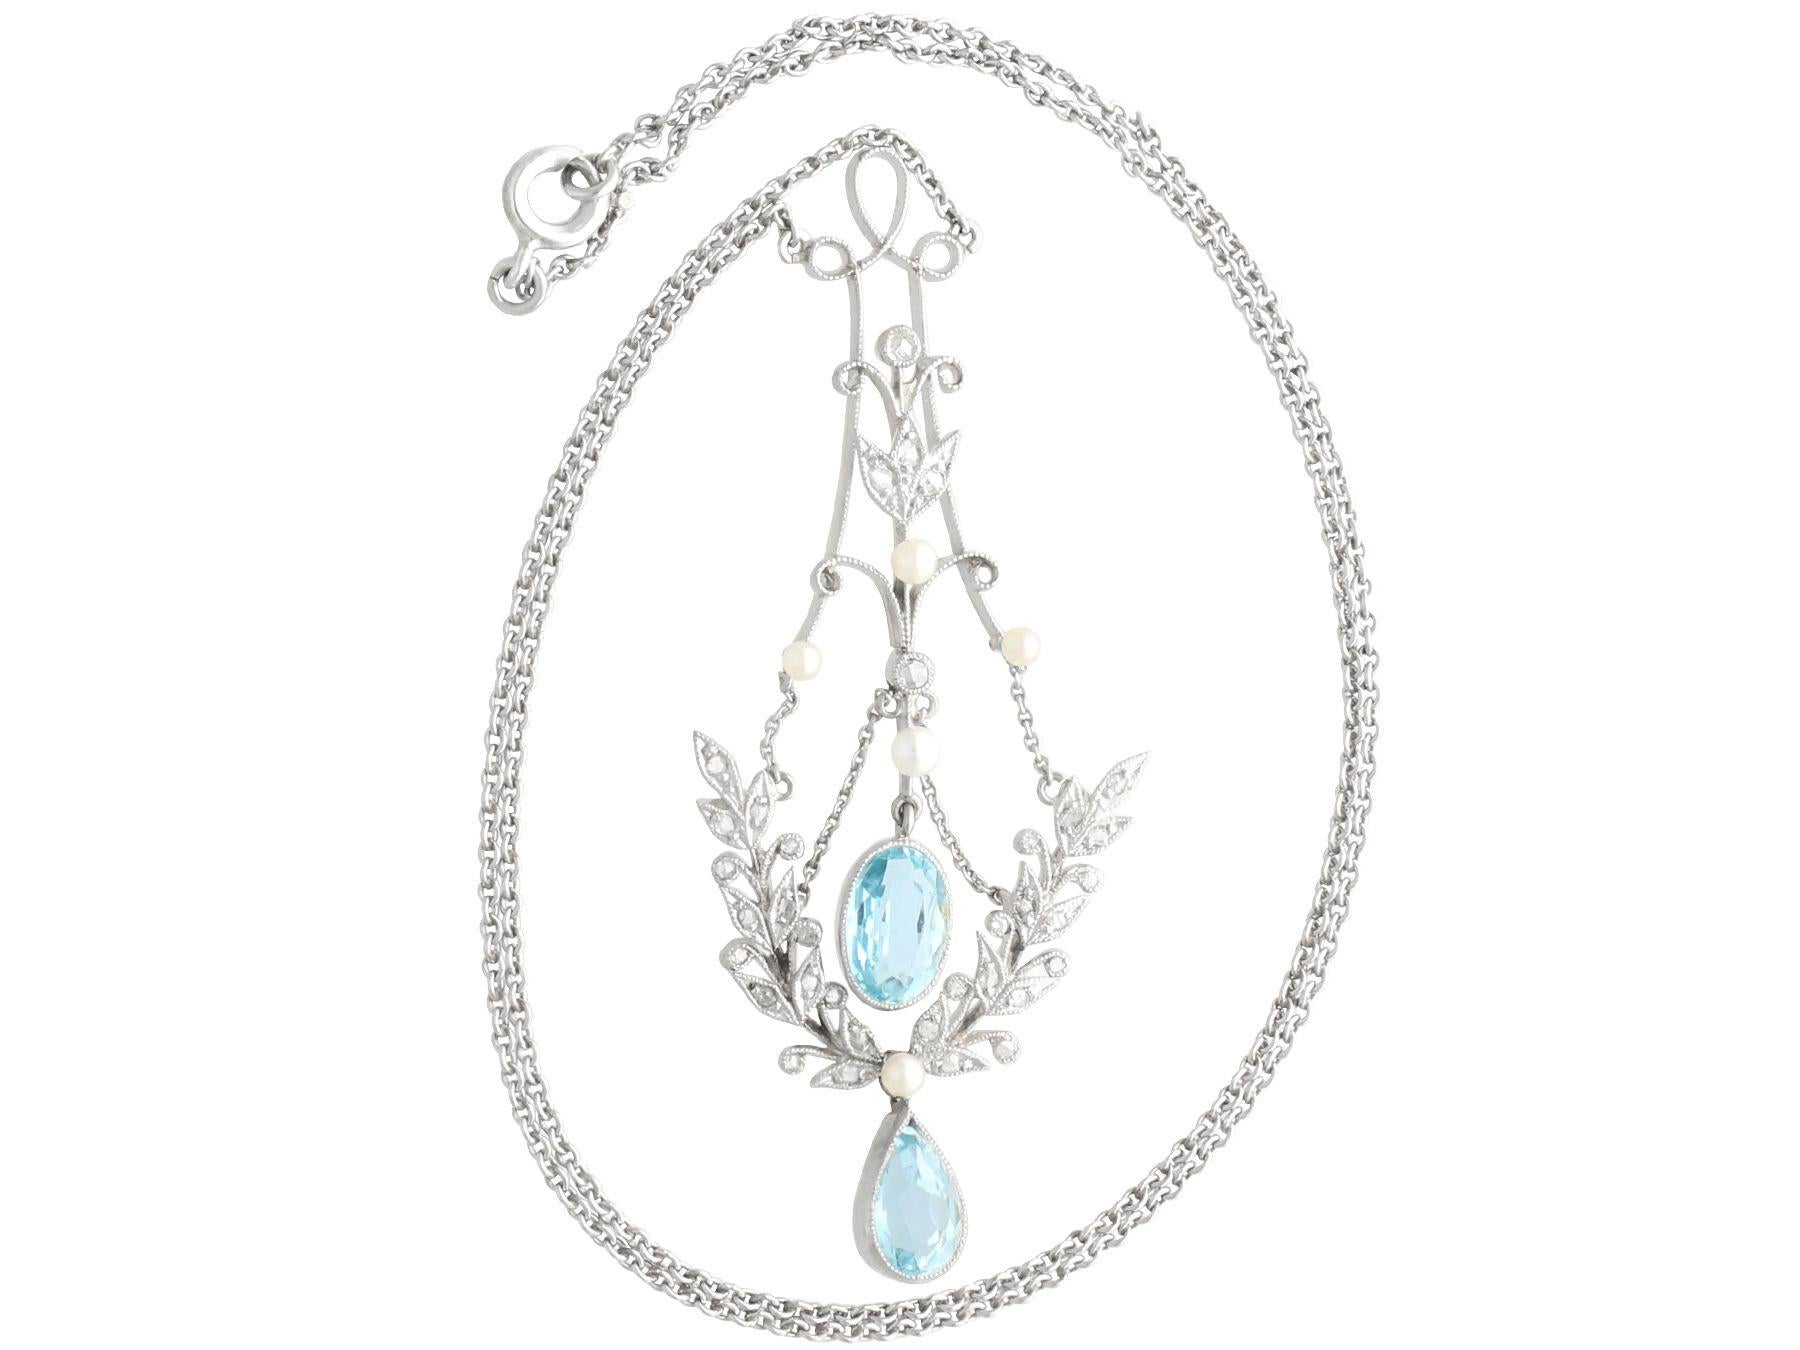 A fine and impressive 1.59 carat aquamarine,1.59 carat diamond and seed pearl, 14 karat yellow gold and platinum pendant; part of our diverse antique jewelry collections

This fine and impressive aquamarine pendant has been crafted in 14k yellow